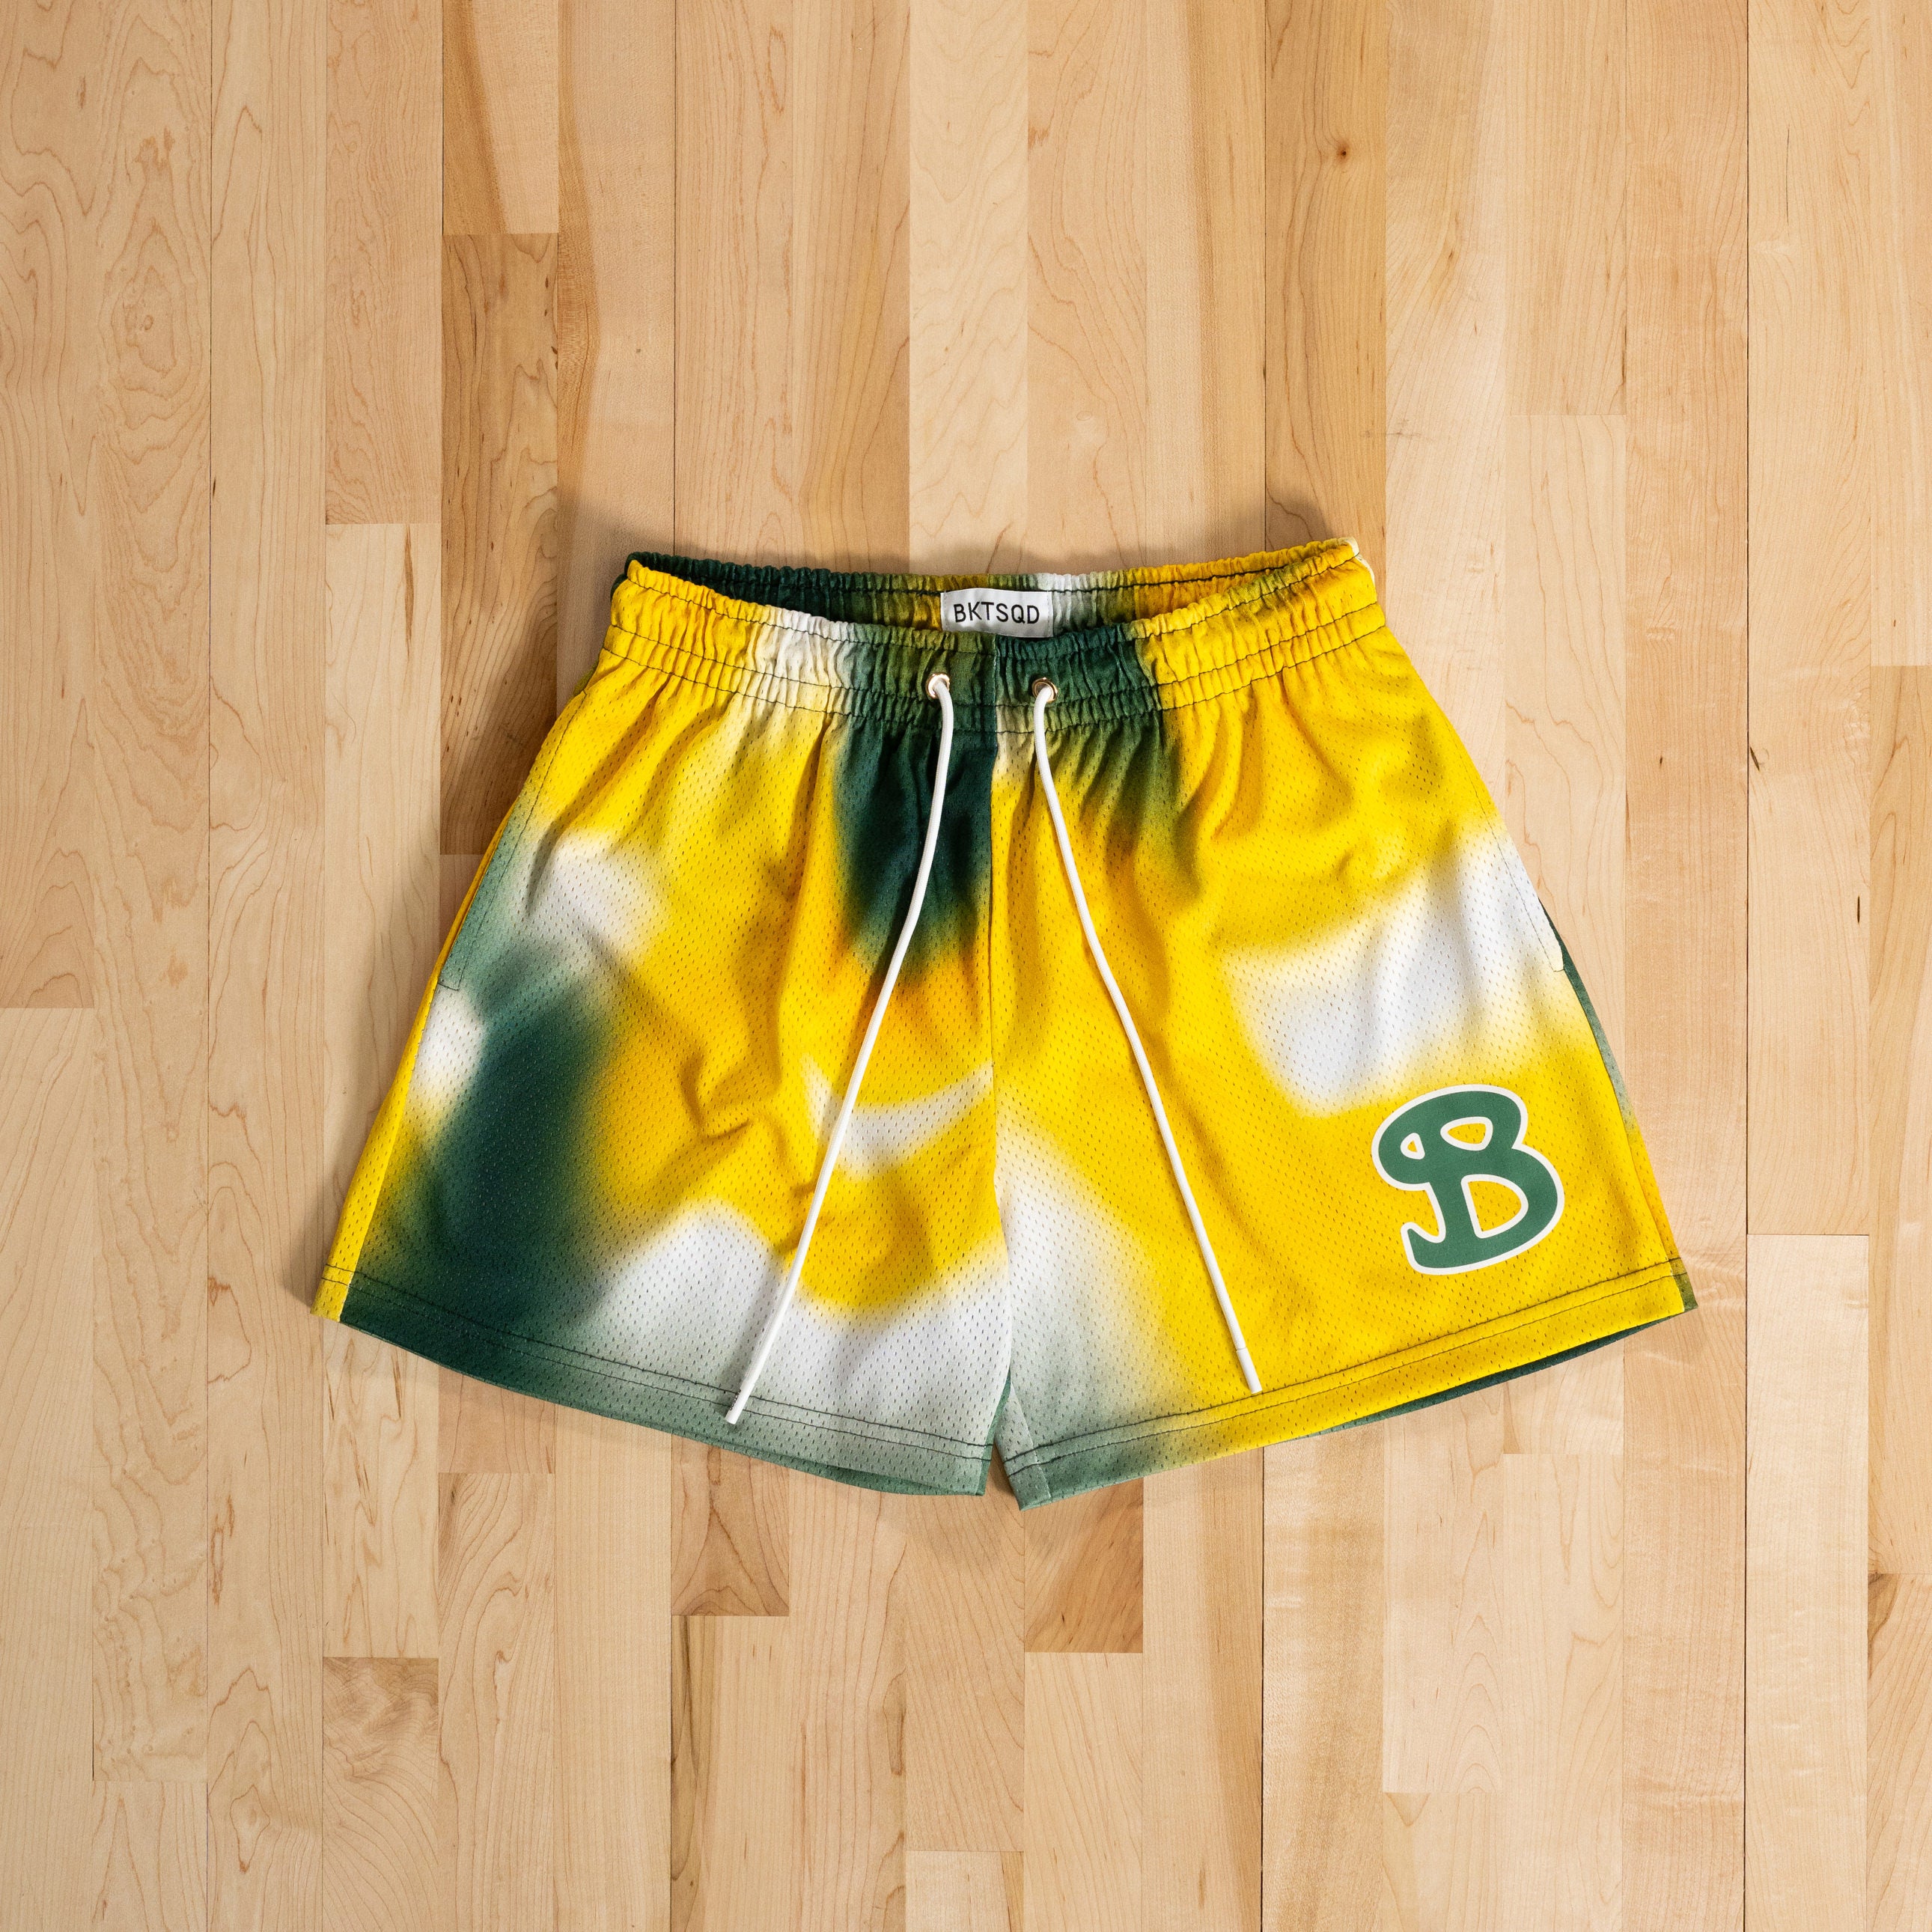 MARCH SLAM ADULT SHORTS - GREEN, YELLOW, WHITE